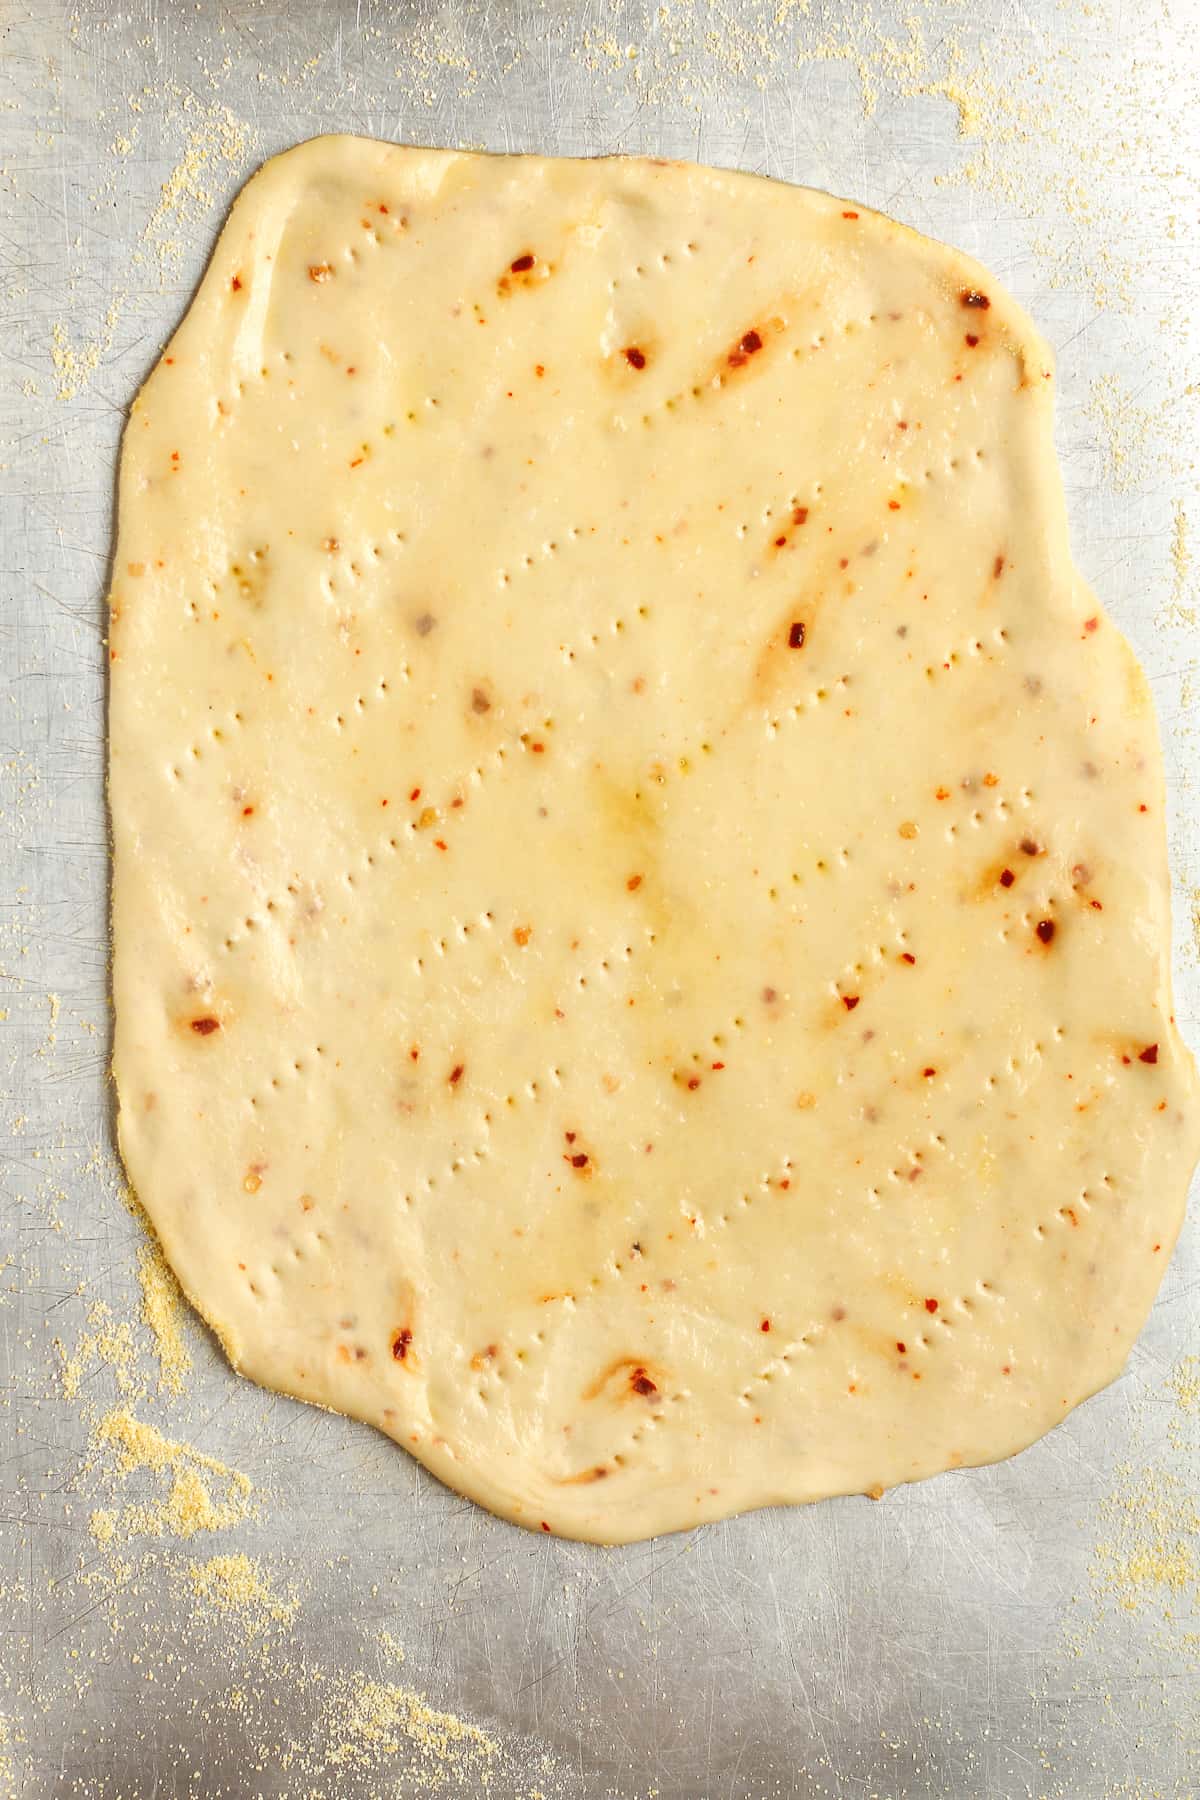 The flatbread dough rolled out with fork holes and olive oil on top.